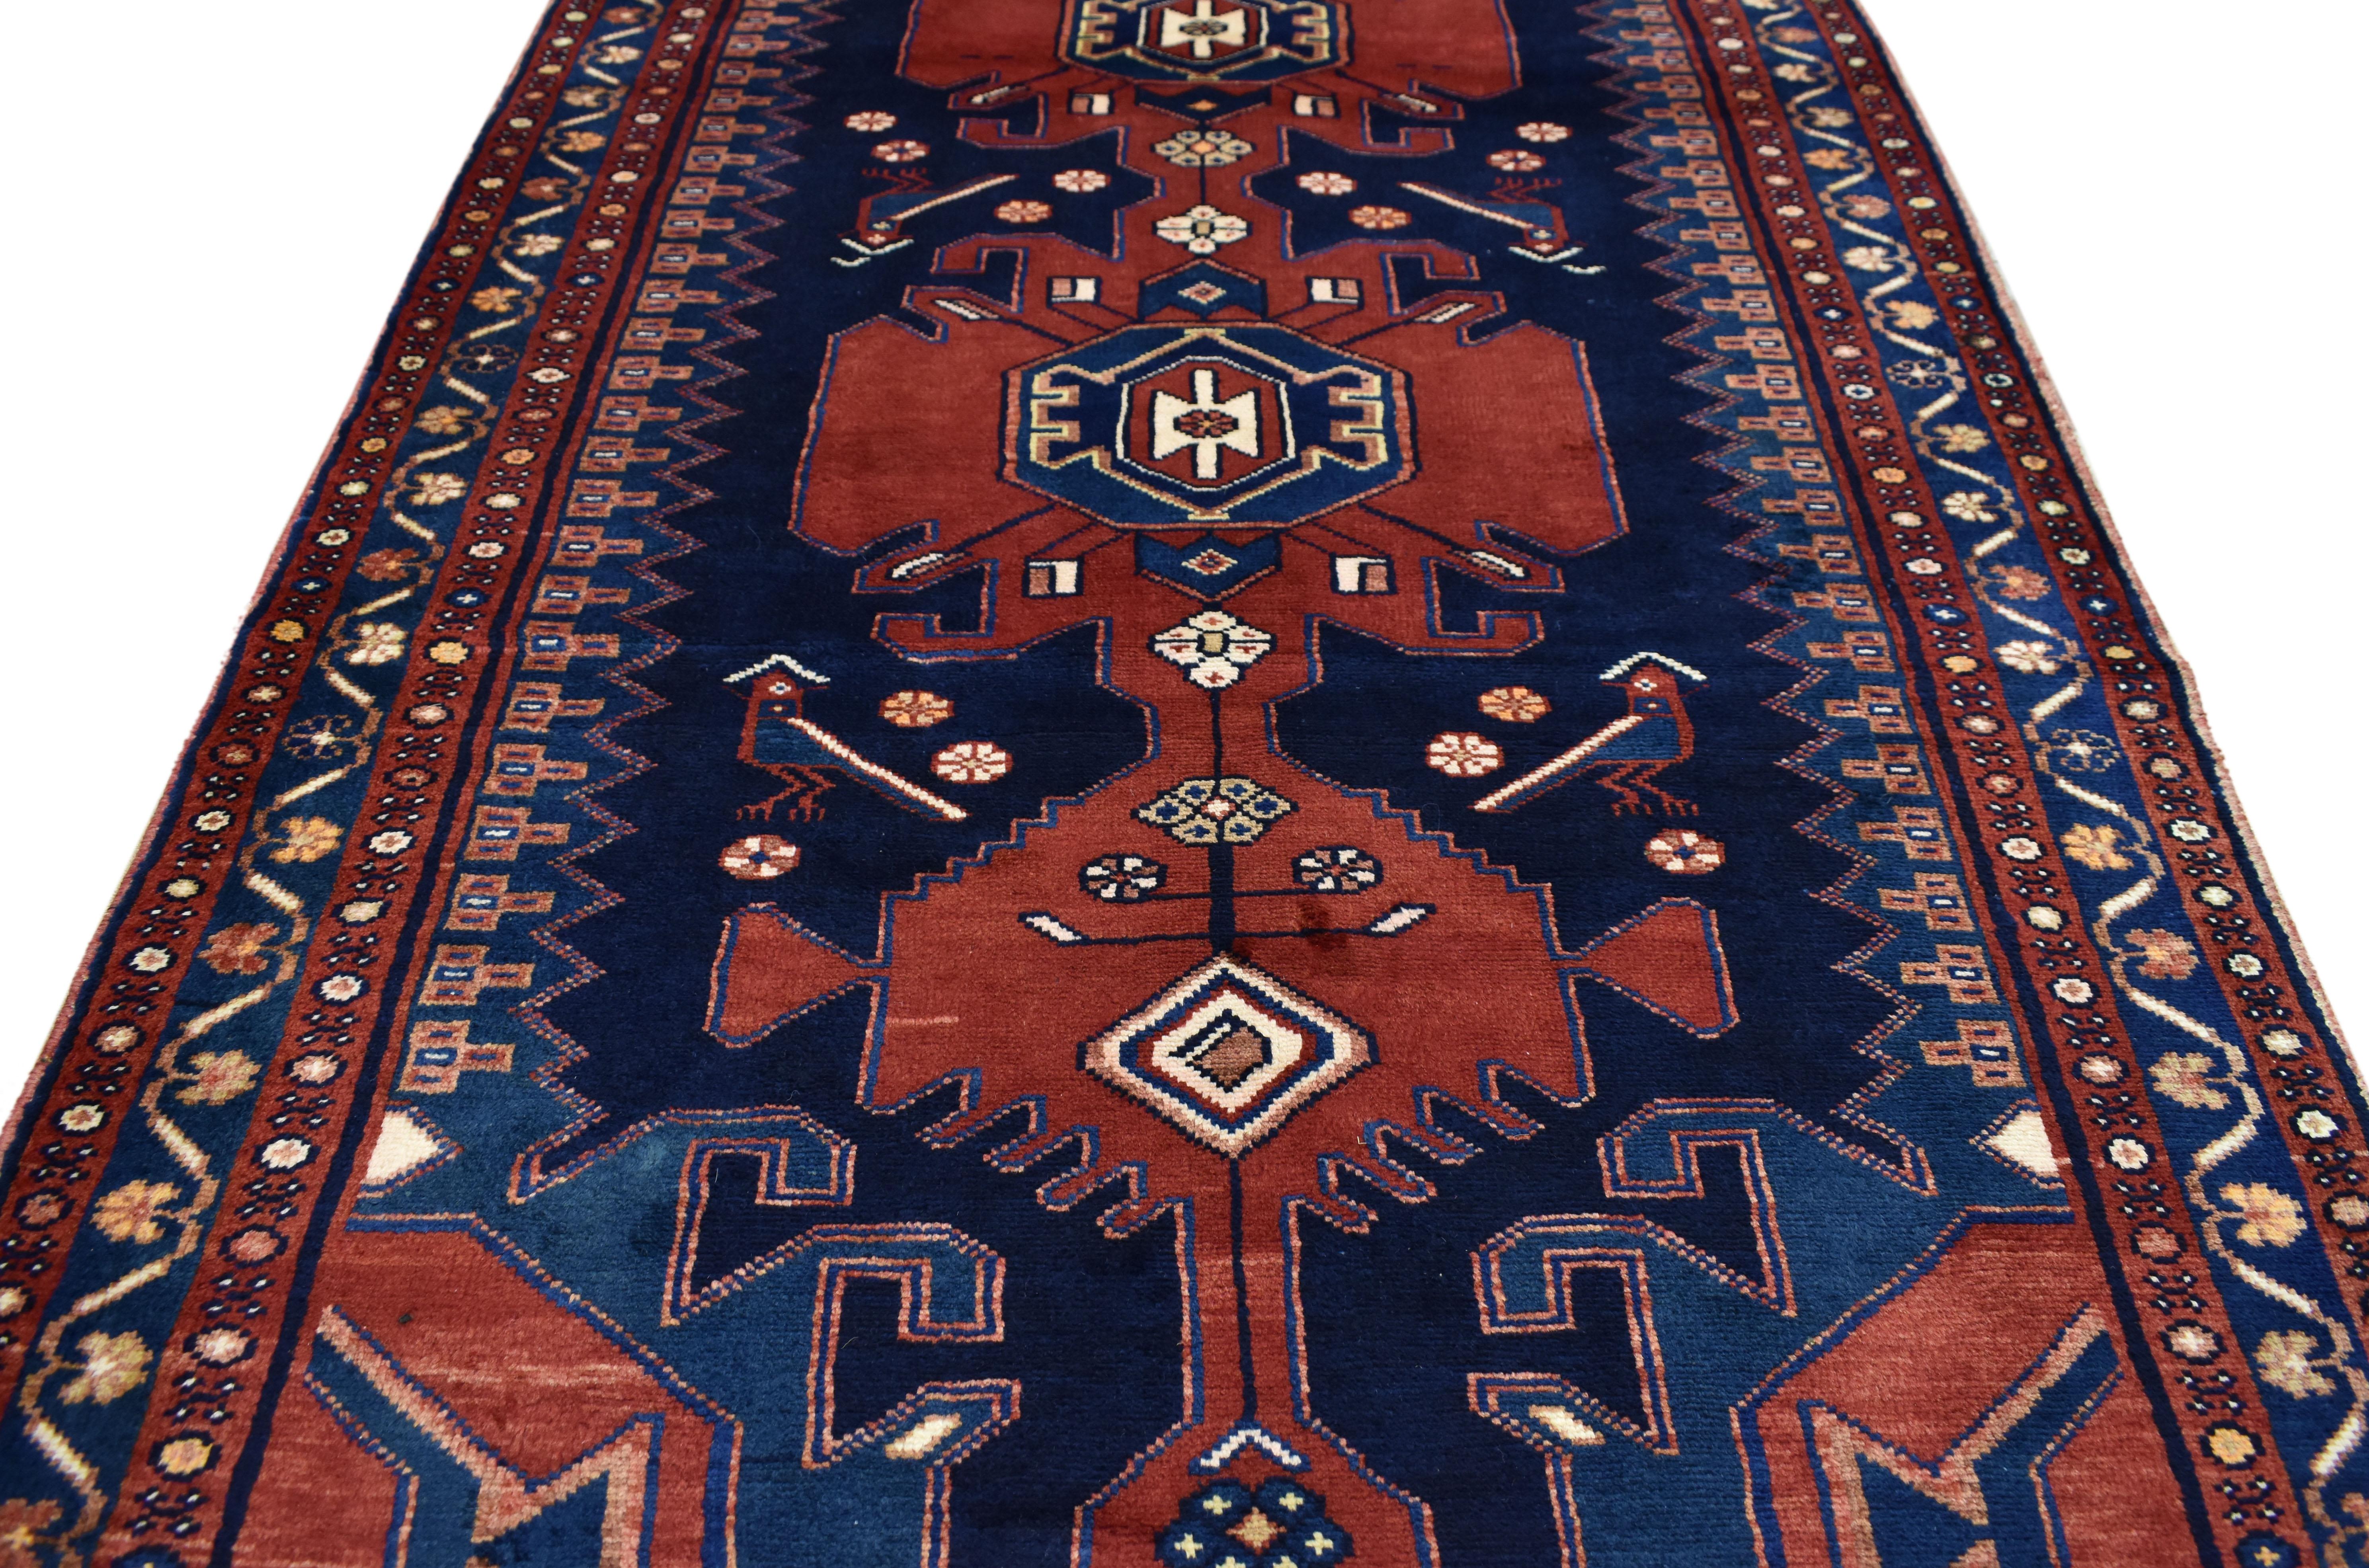 75360 Antique Persian Nahavand Hamadan Runner with Modern Tribal Style. This hand-knotted wool antique Persian Nahavand Hamadan runner with modern tribal style showcases an extravagant geometric pole medallion design rendered in saturated colors of